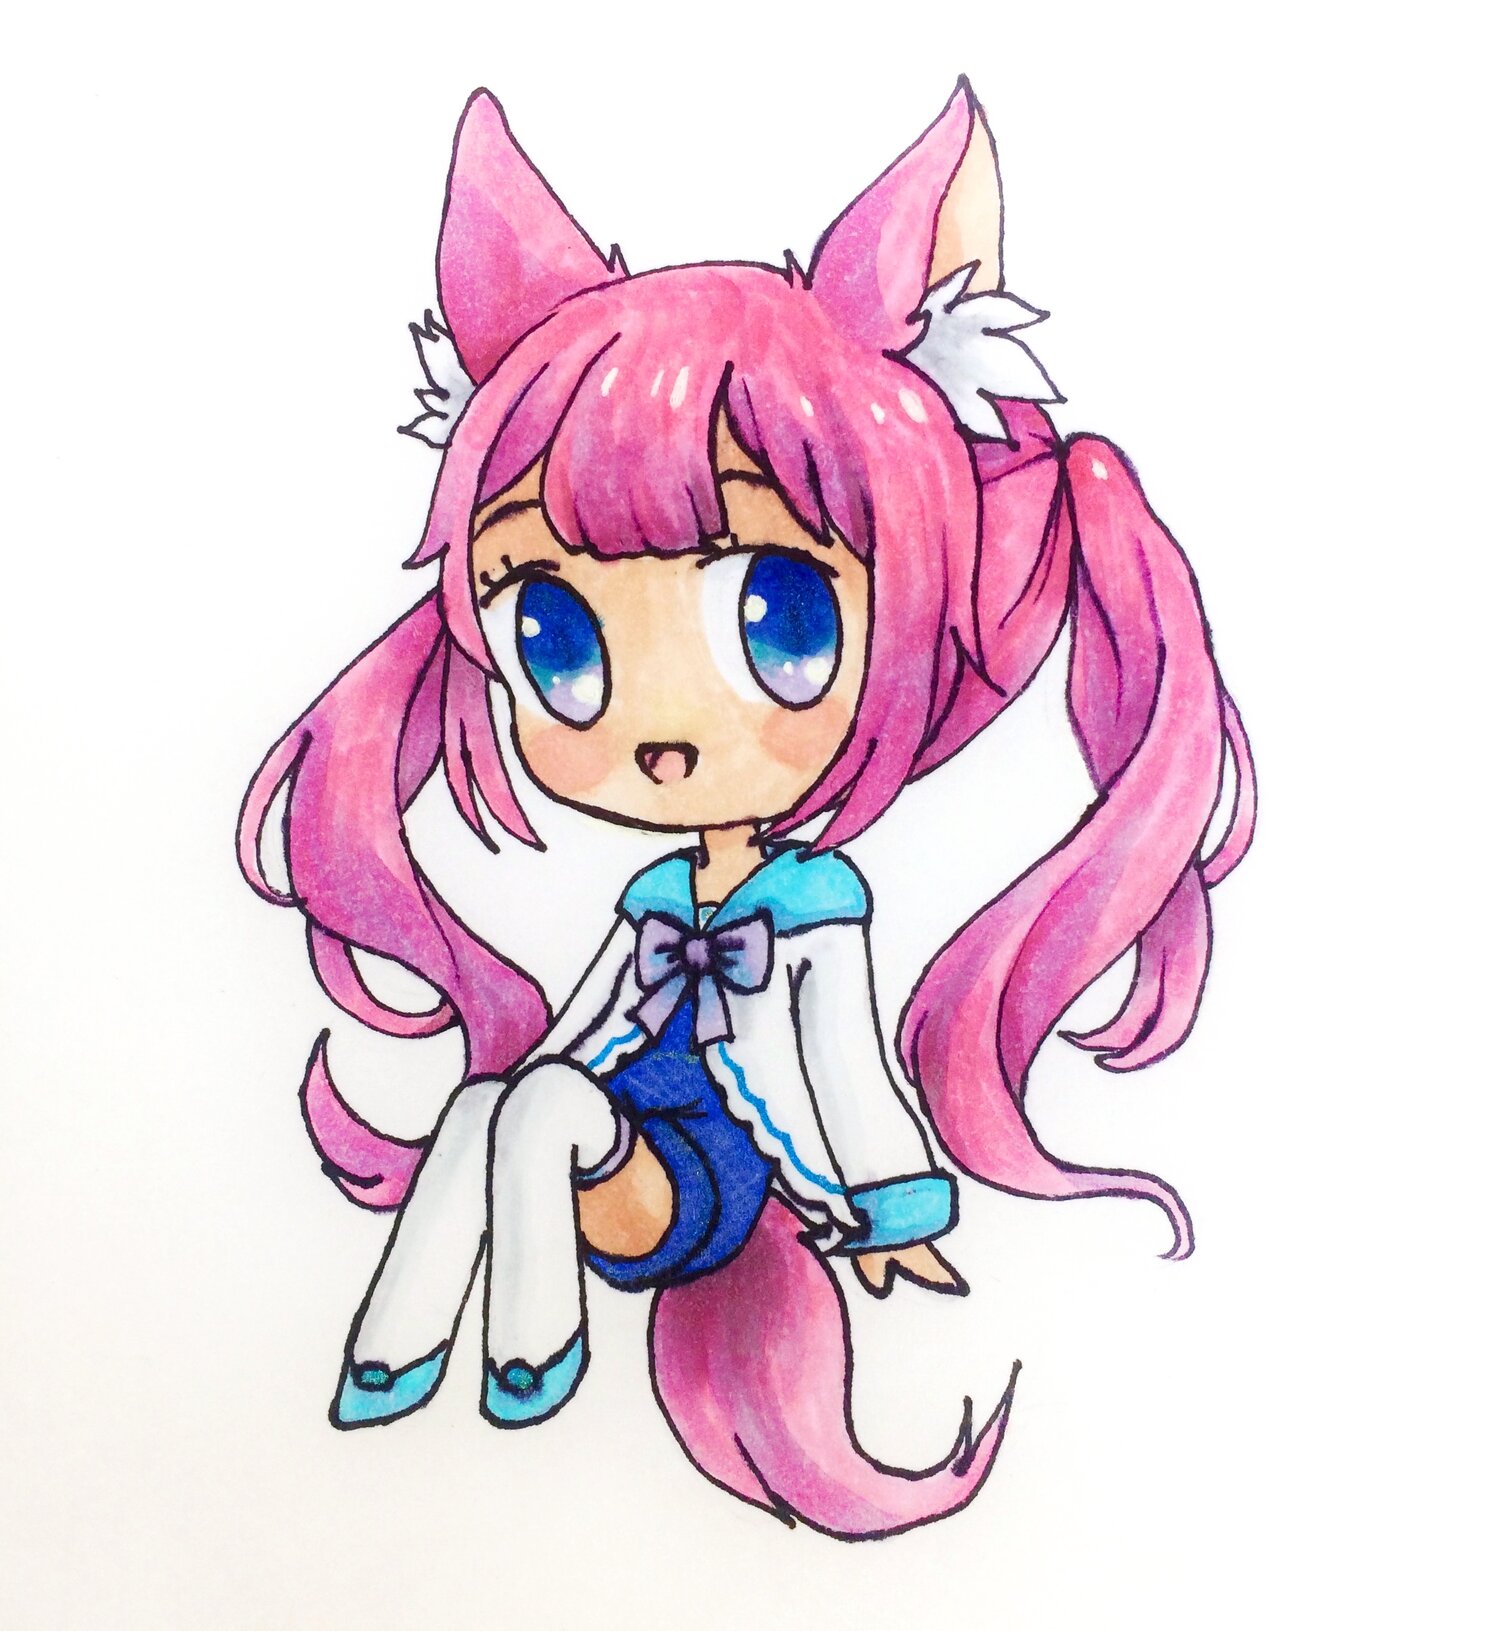 Chibi Anime Drawing (July 20-24, Half Day PM Online Class) — Camp  Fashionista